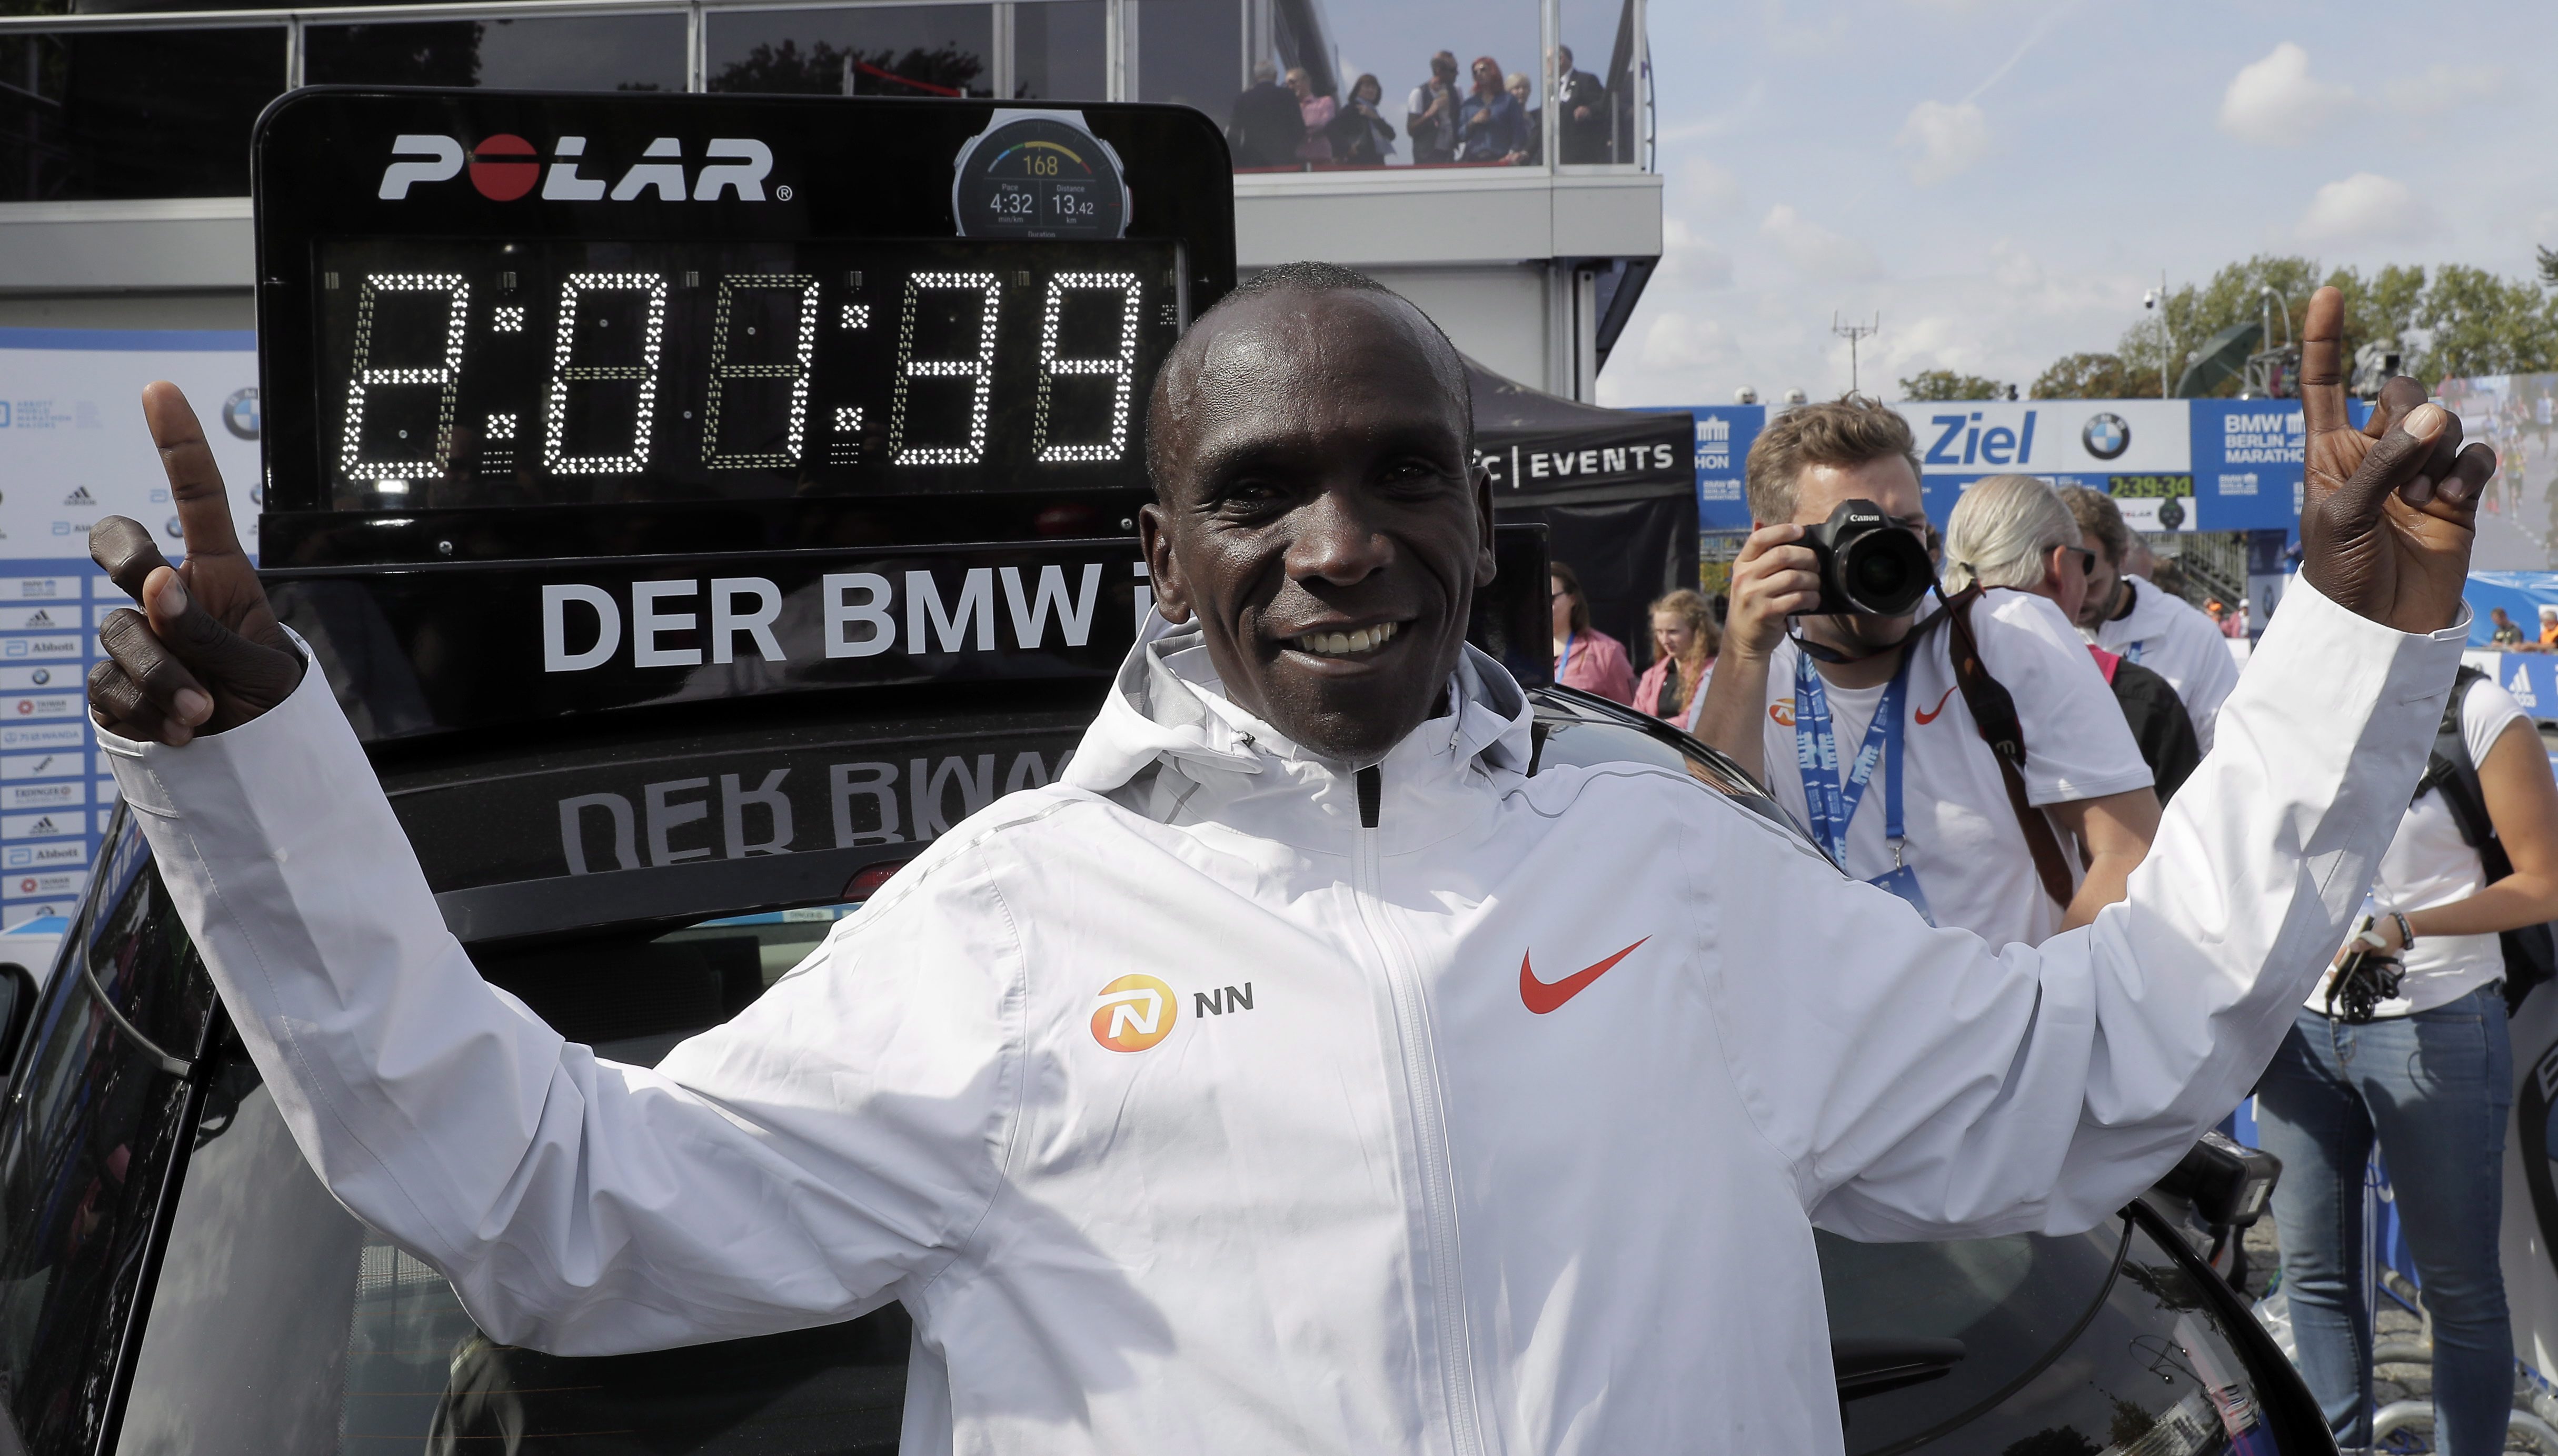 Eliud Kipchoge in front of the clock showing his world record time 